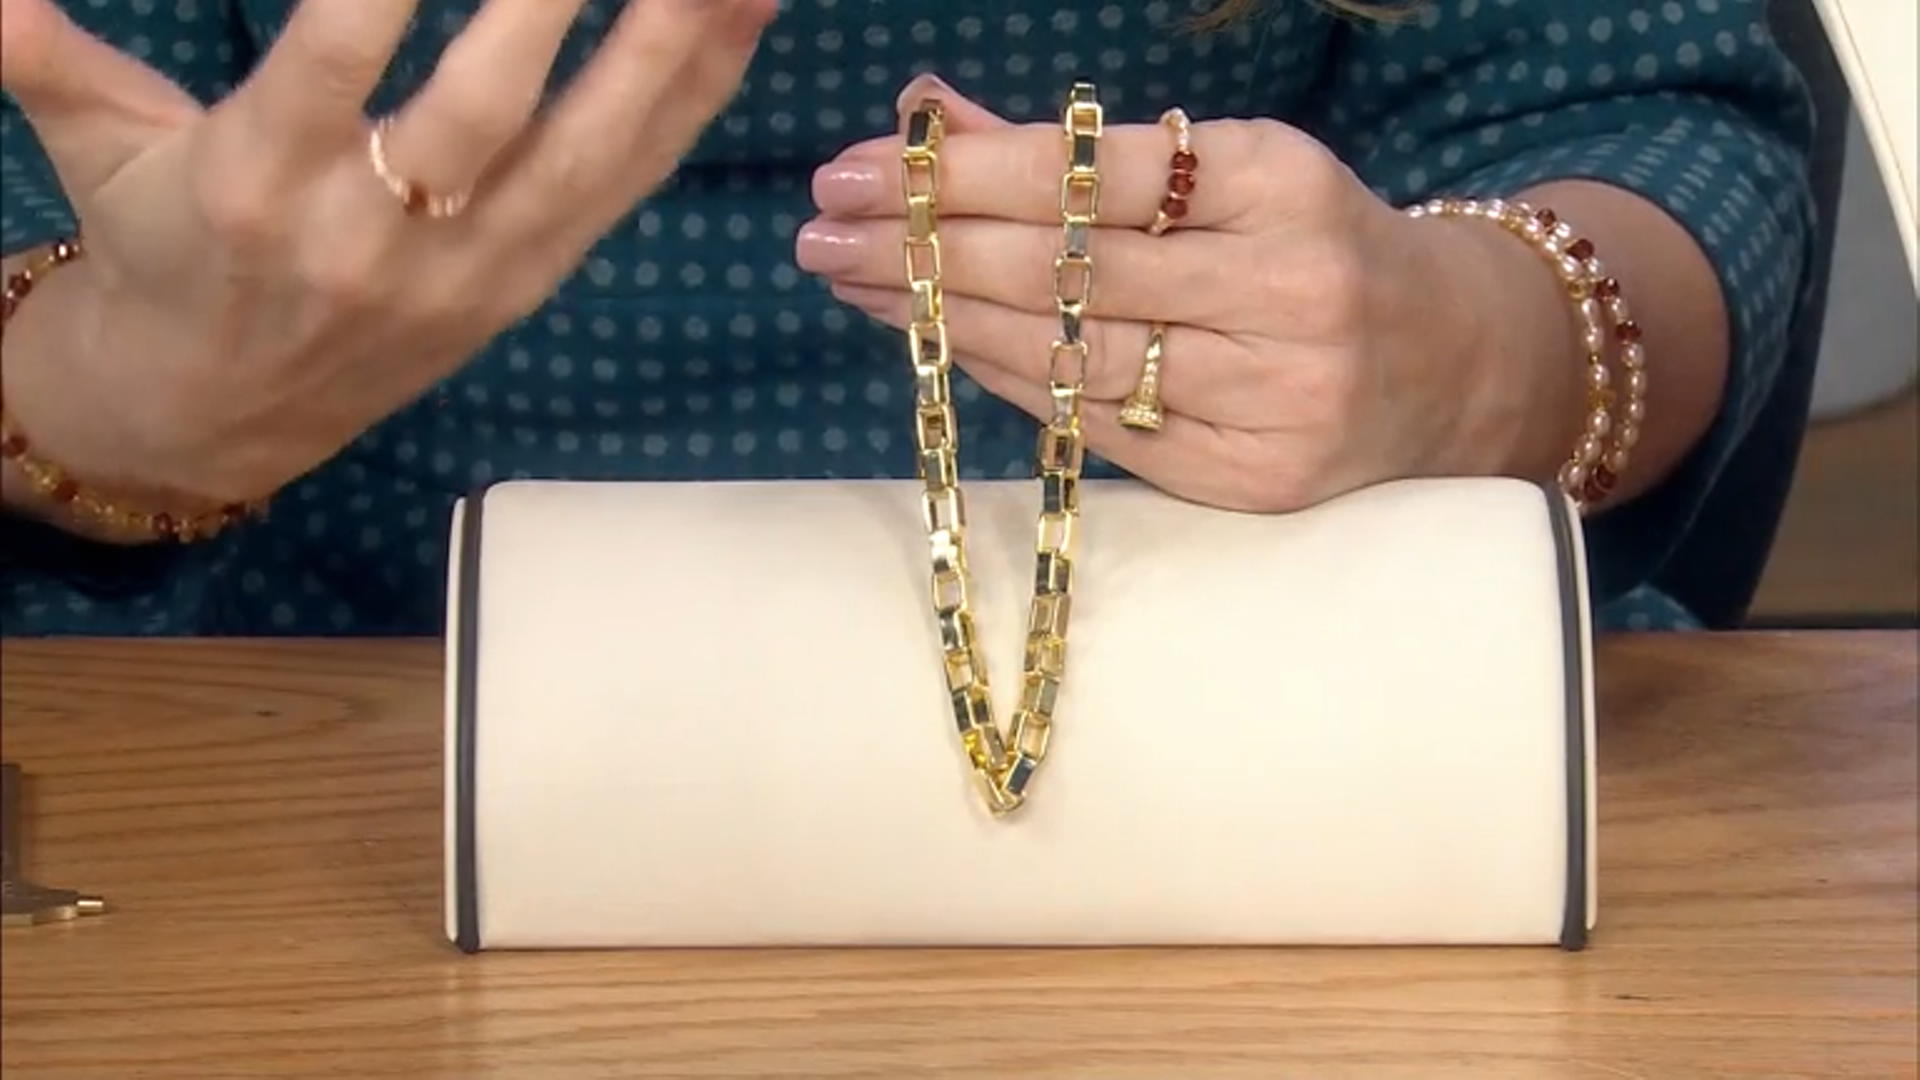 14k Gold Plated Box Link Chain & Findings Assortment, Lobster Clasps & Jump Rings Video Thumbnail